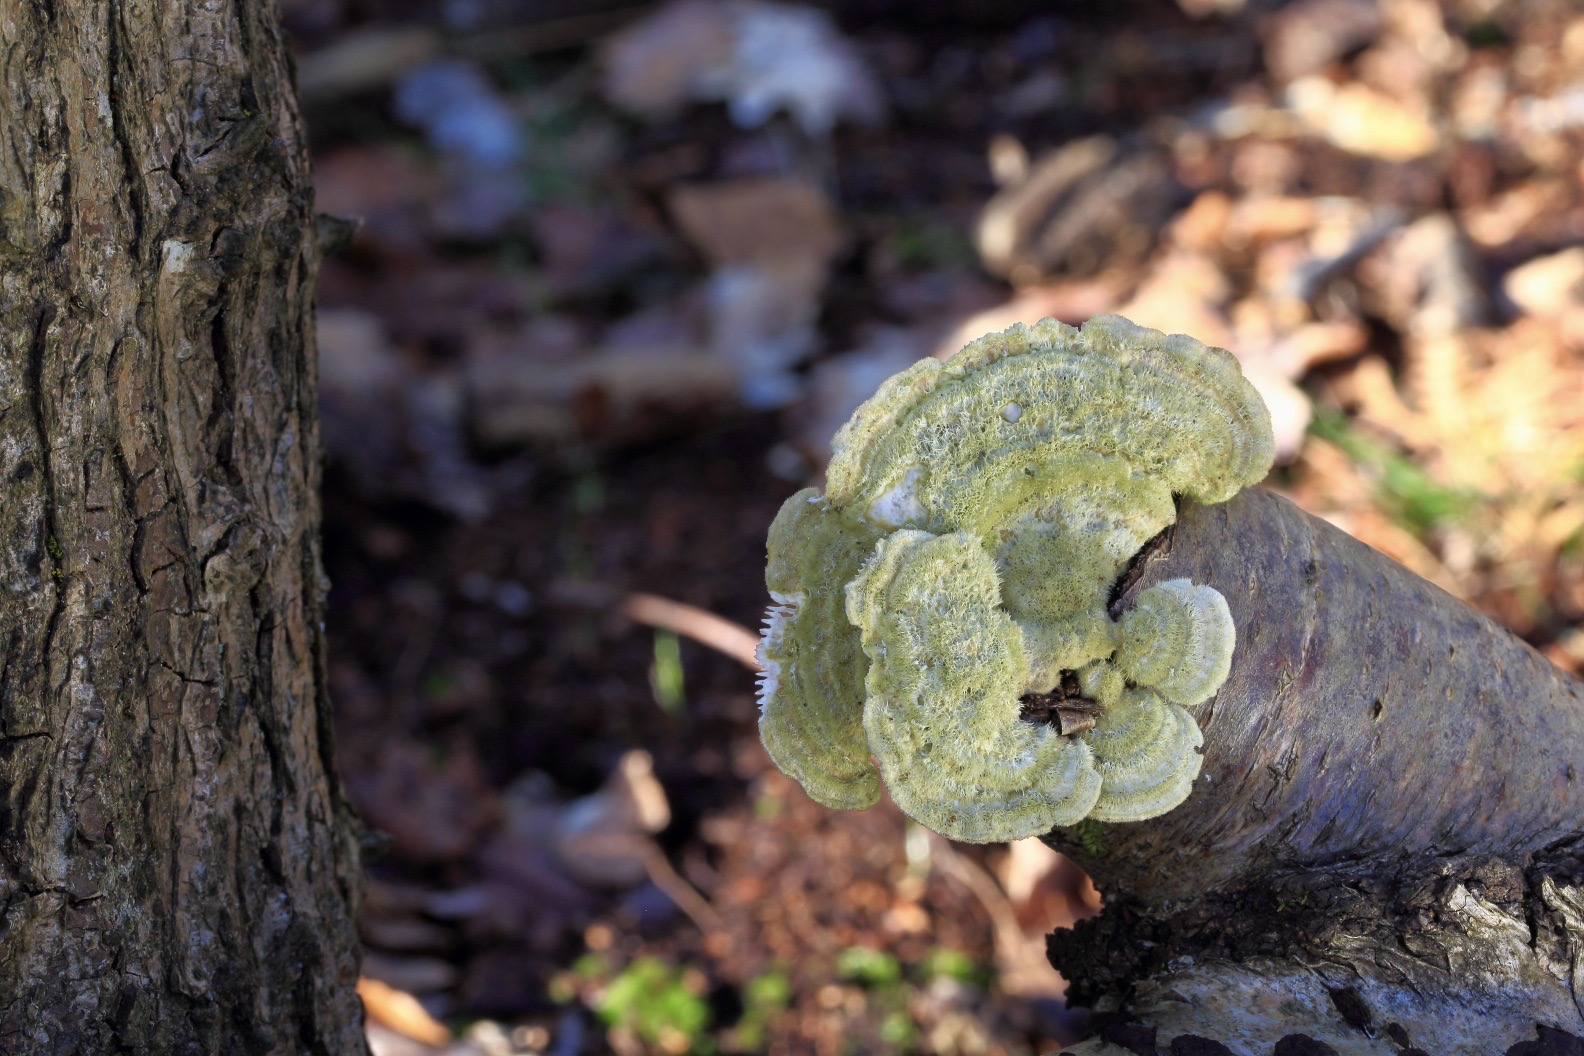 The upper surface of the Birch Mazegill (Trametes betulina) can look very similar to the Lumpy Bracket